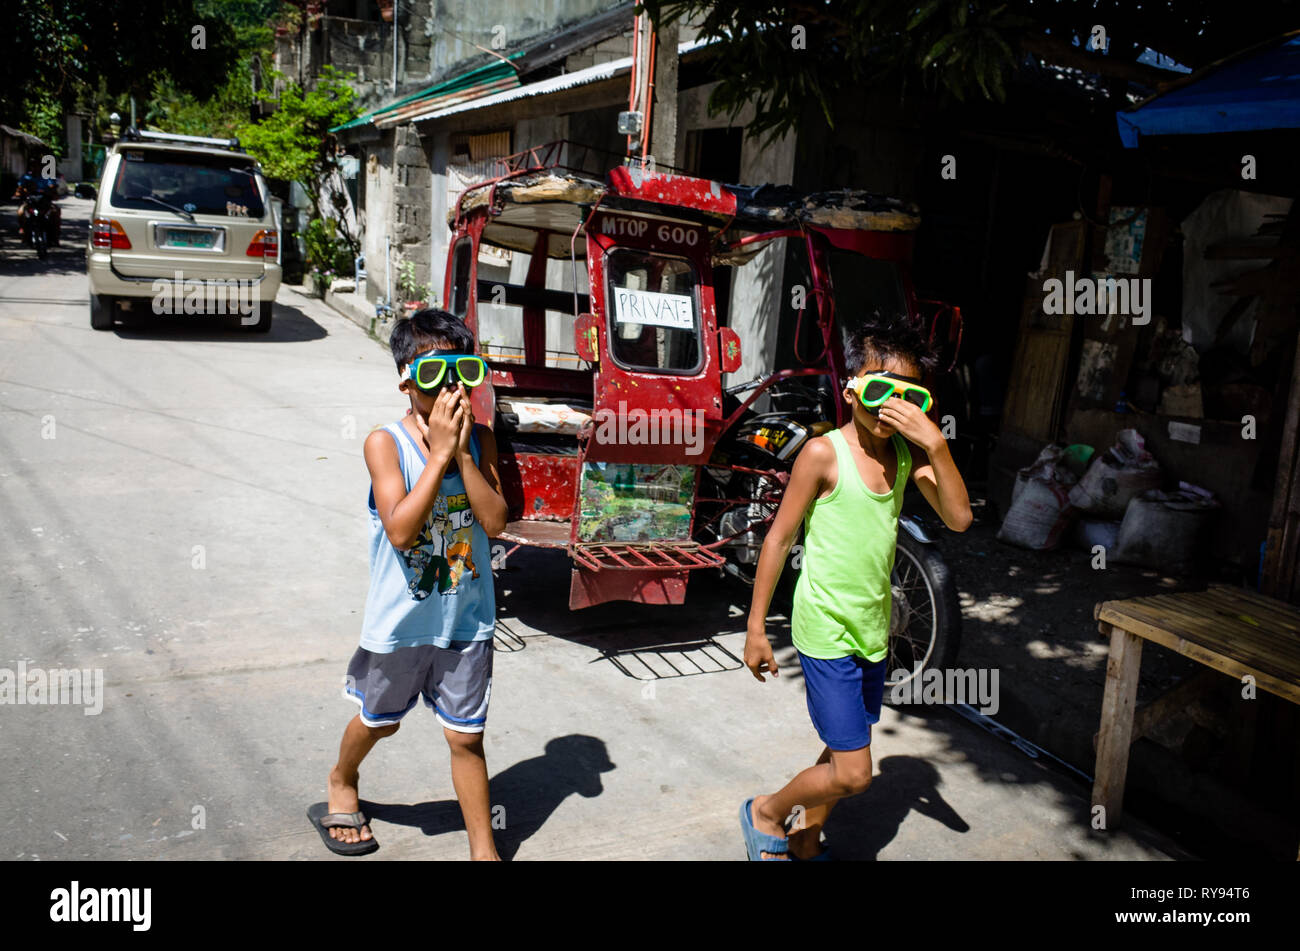 Young Filipino boys plying in the street with diving goggles on - Romblon Island, Philippines Stock Photo